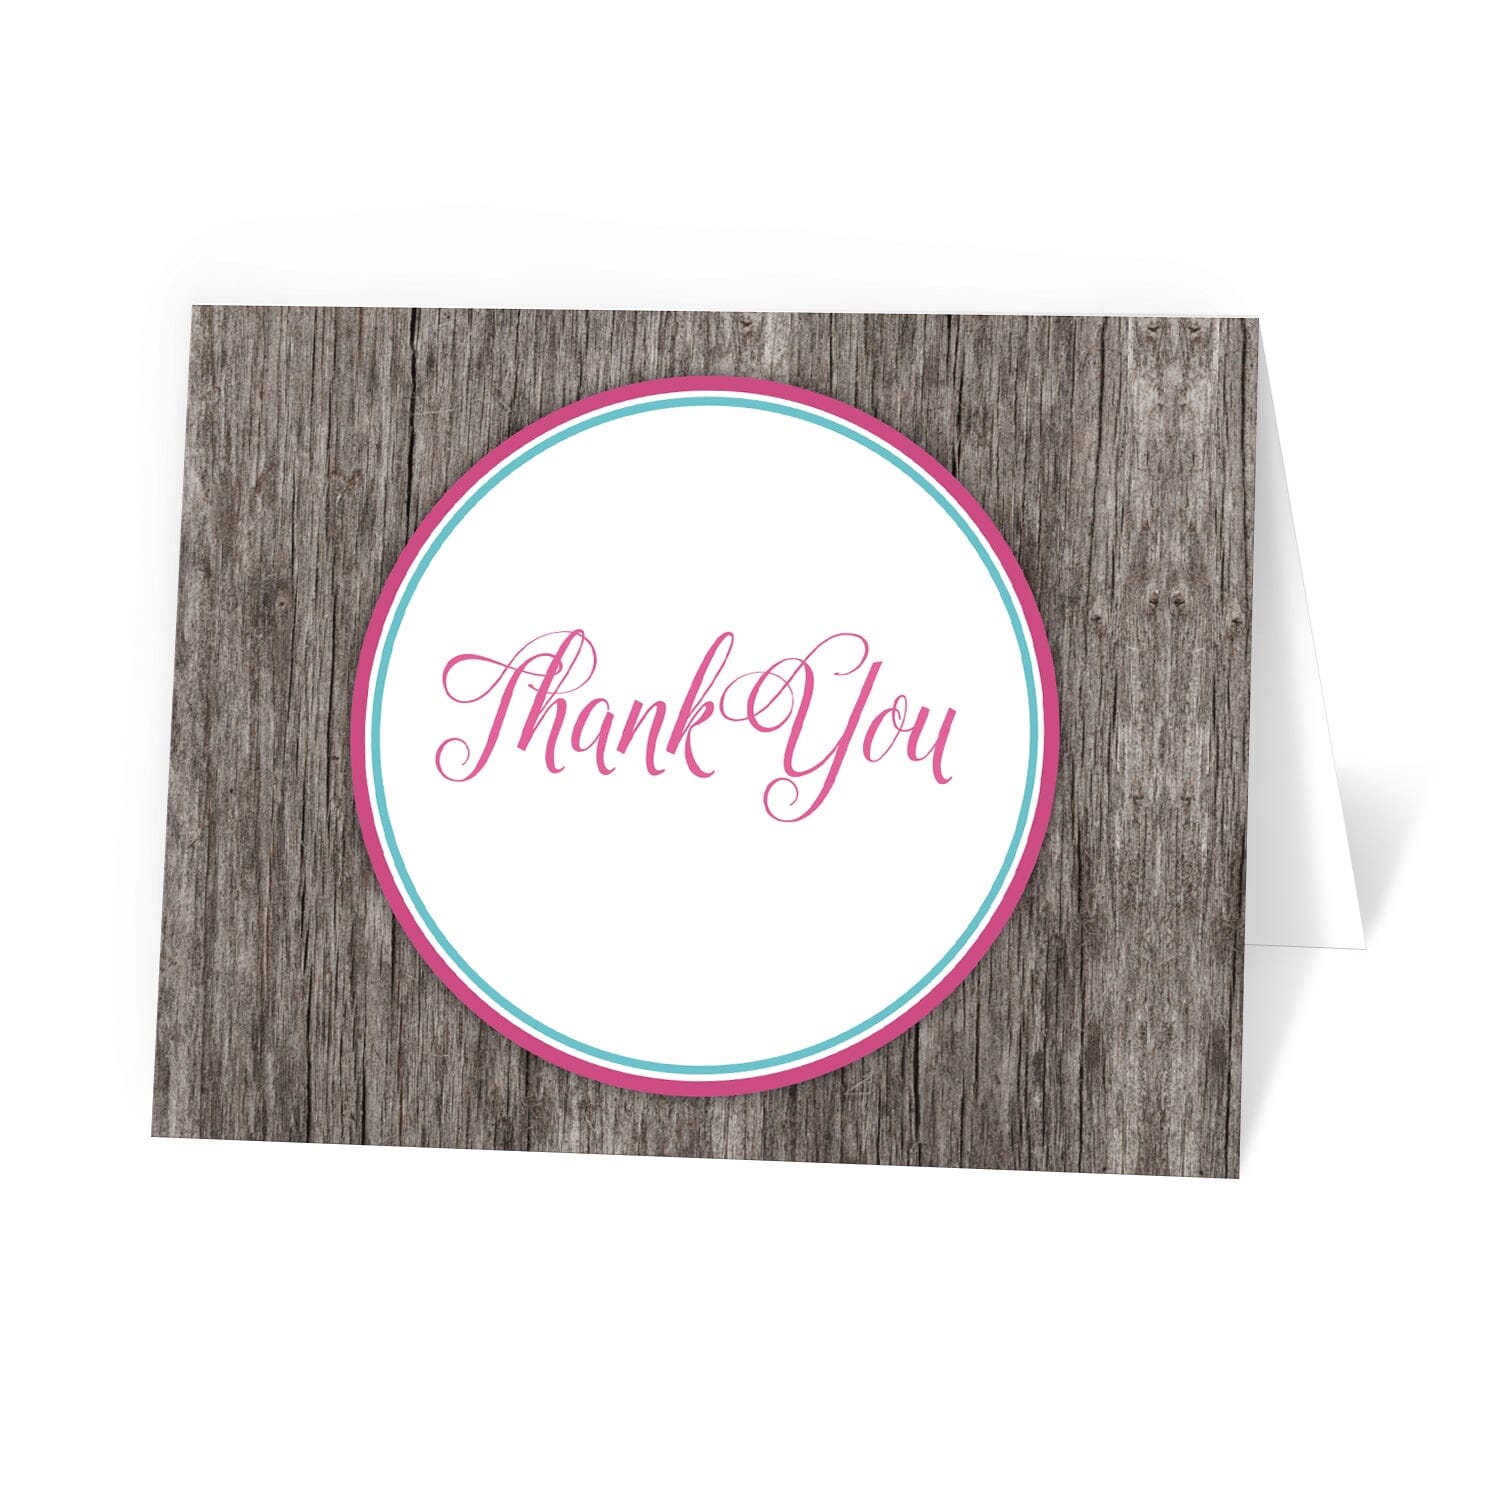 Fuchsia Turquoise Rustic Wood Thank You Cards at Artistically Invited.